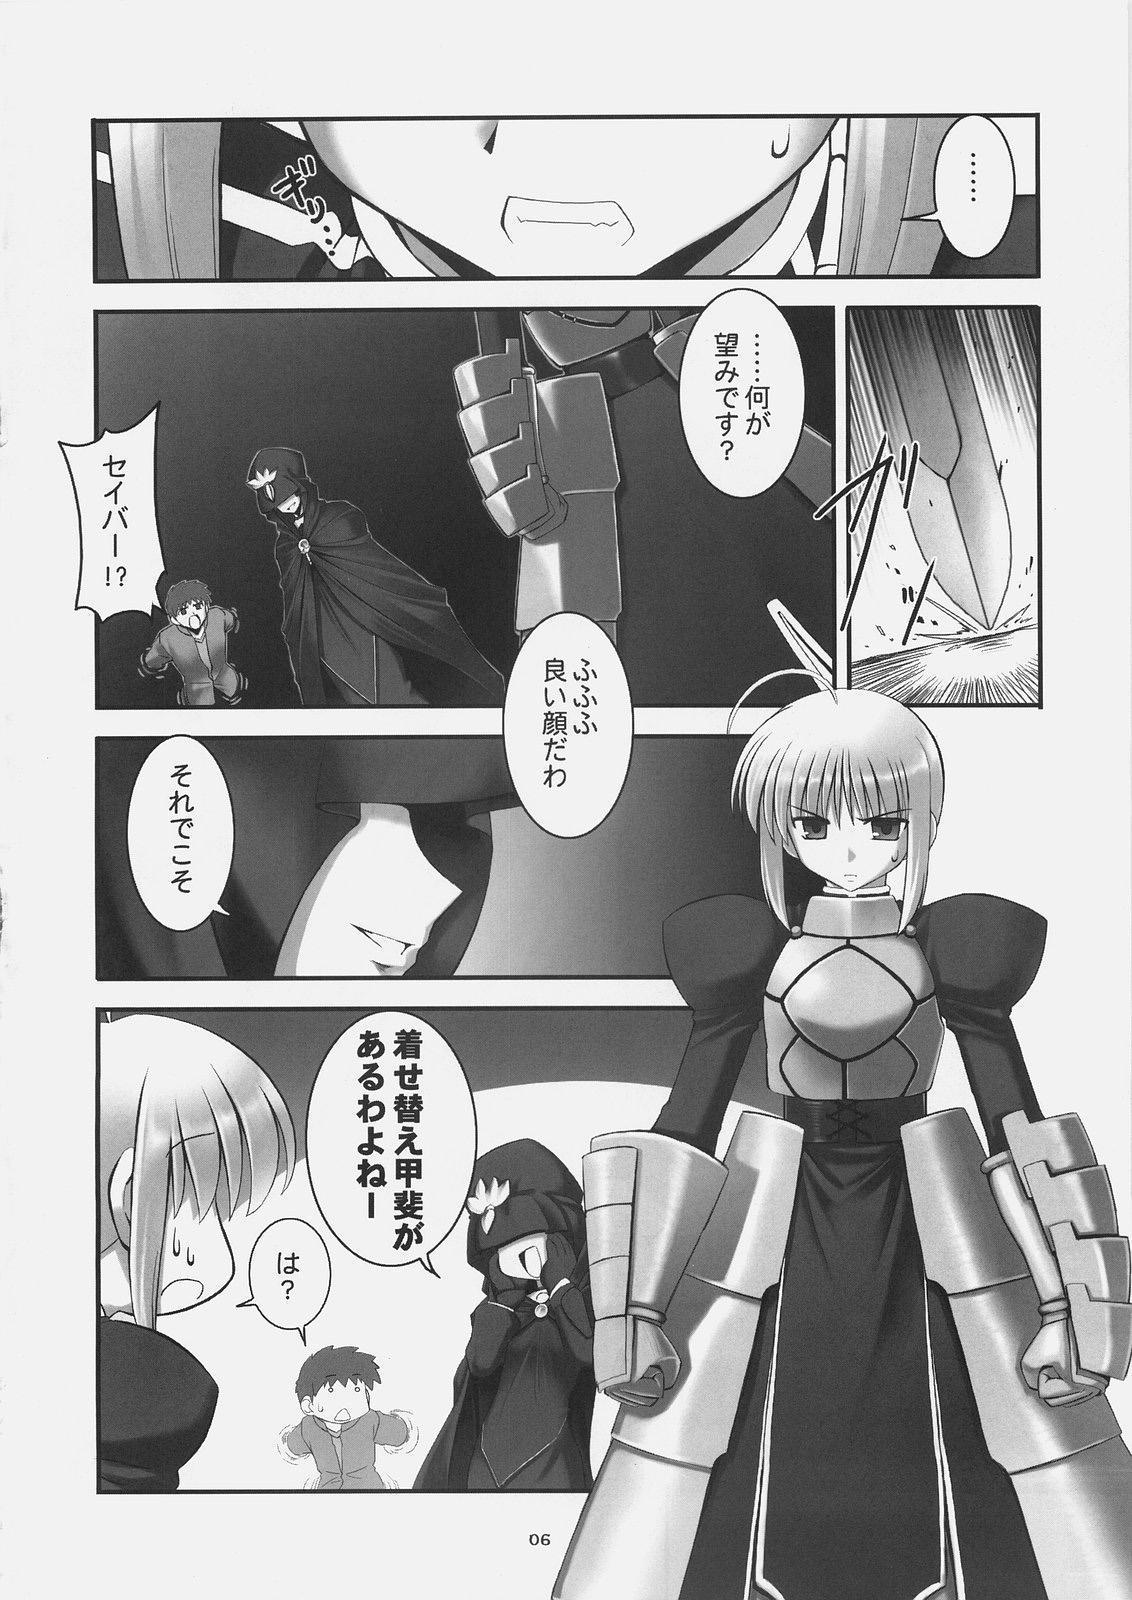 Mofos RE 01 - Fate stay night Follada - Page 5